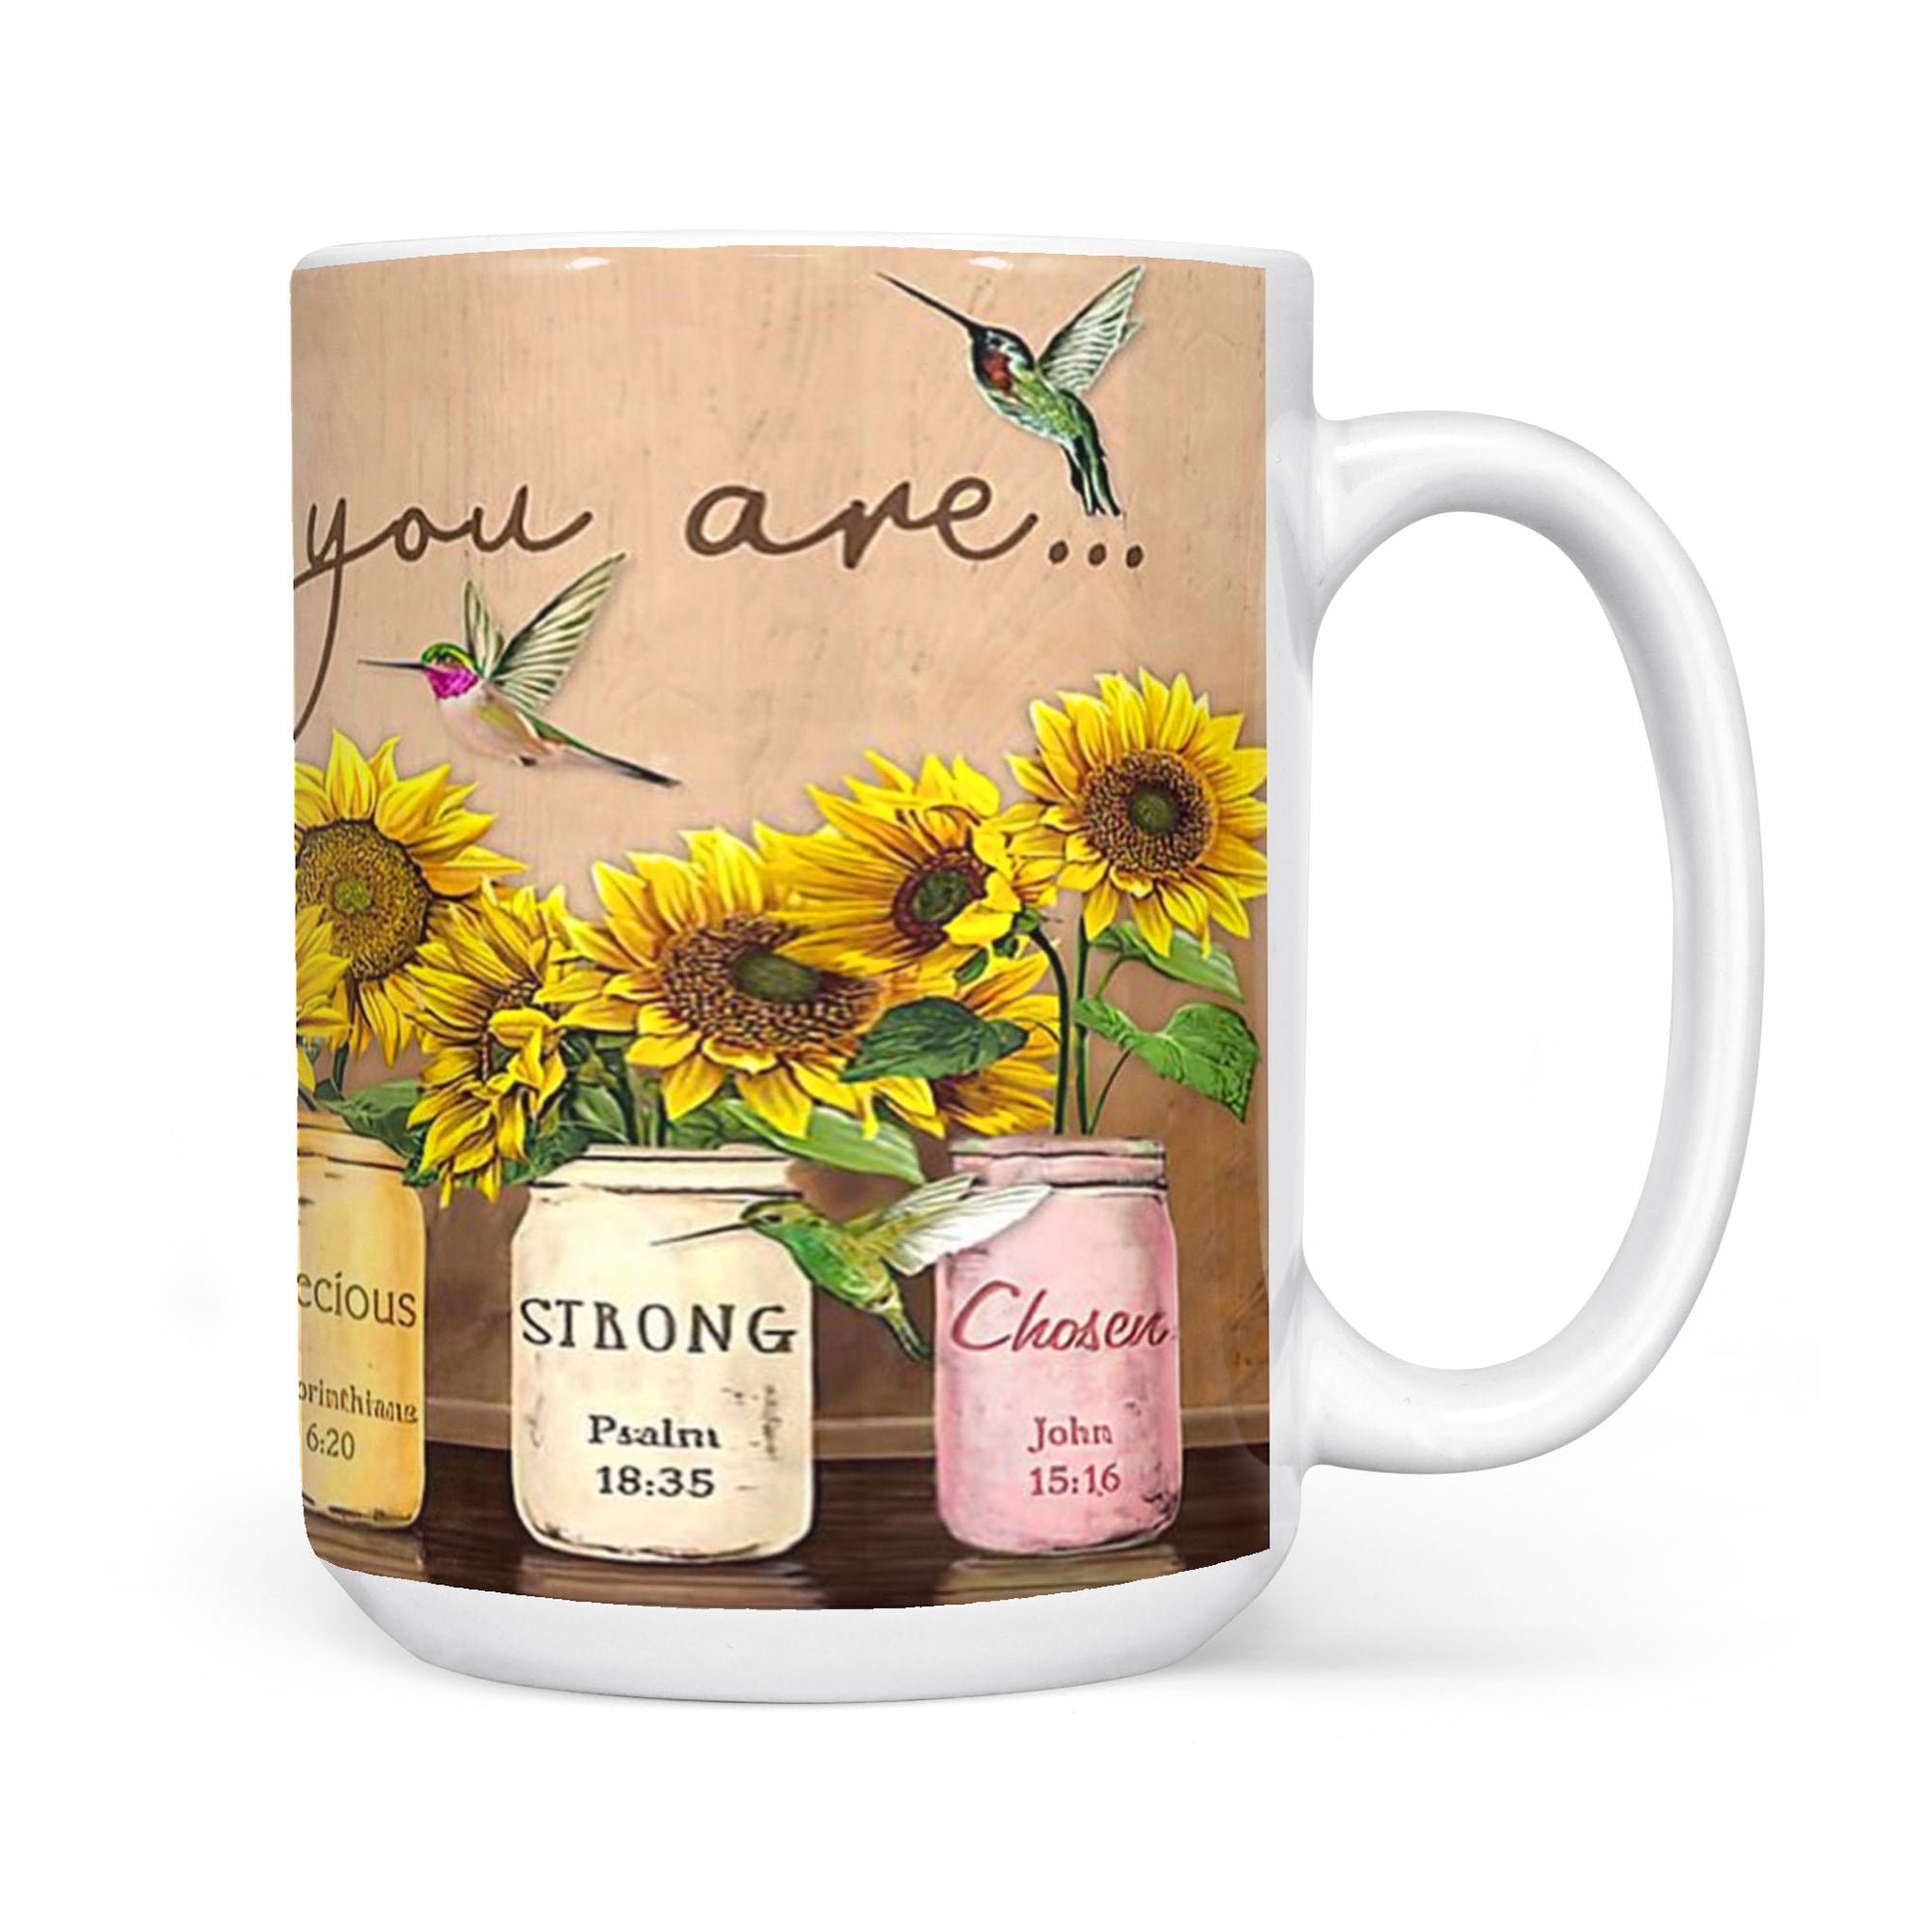 God says you are Unique special lovely precious strong chosen Sunflower White Edge-to-Edge Mug